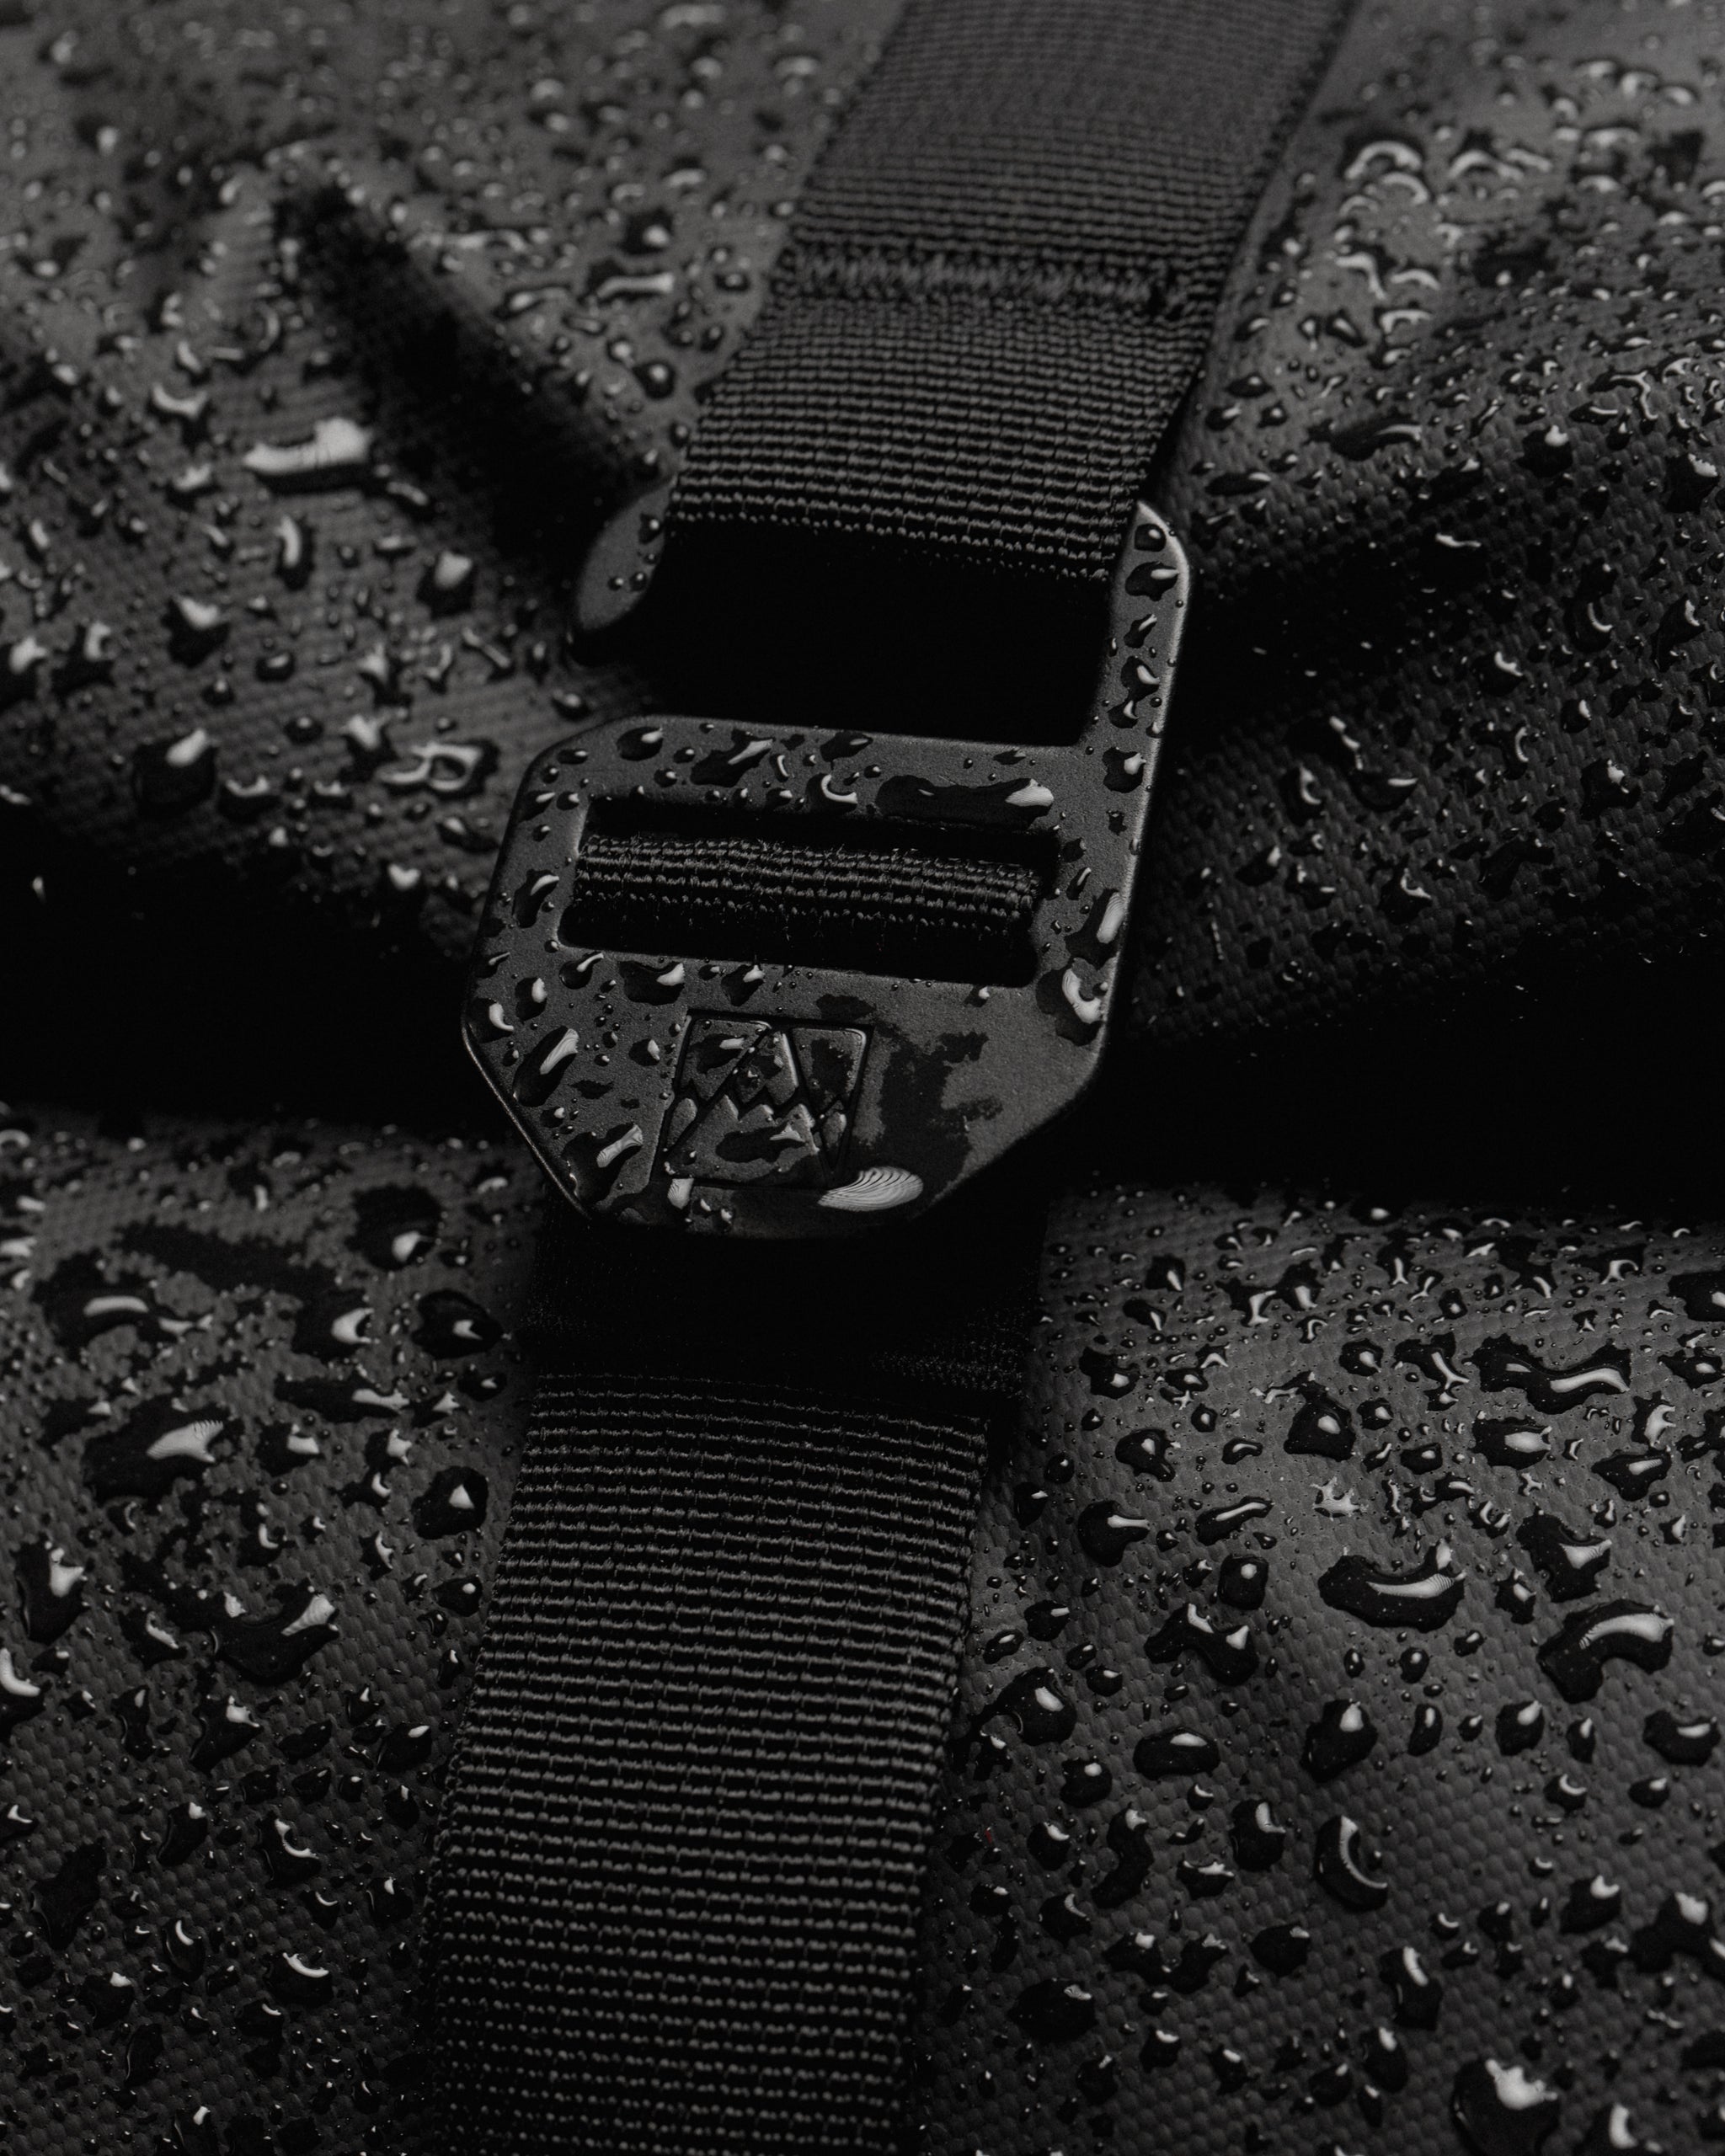 Close up of Roll Top backpack G-hook fastening with rain droplets on the bag